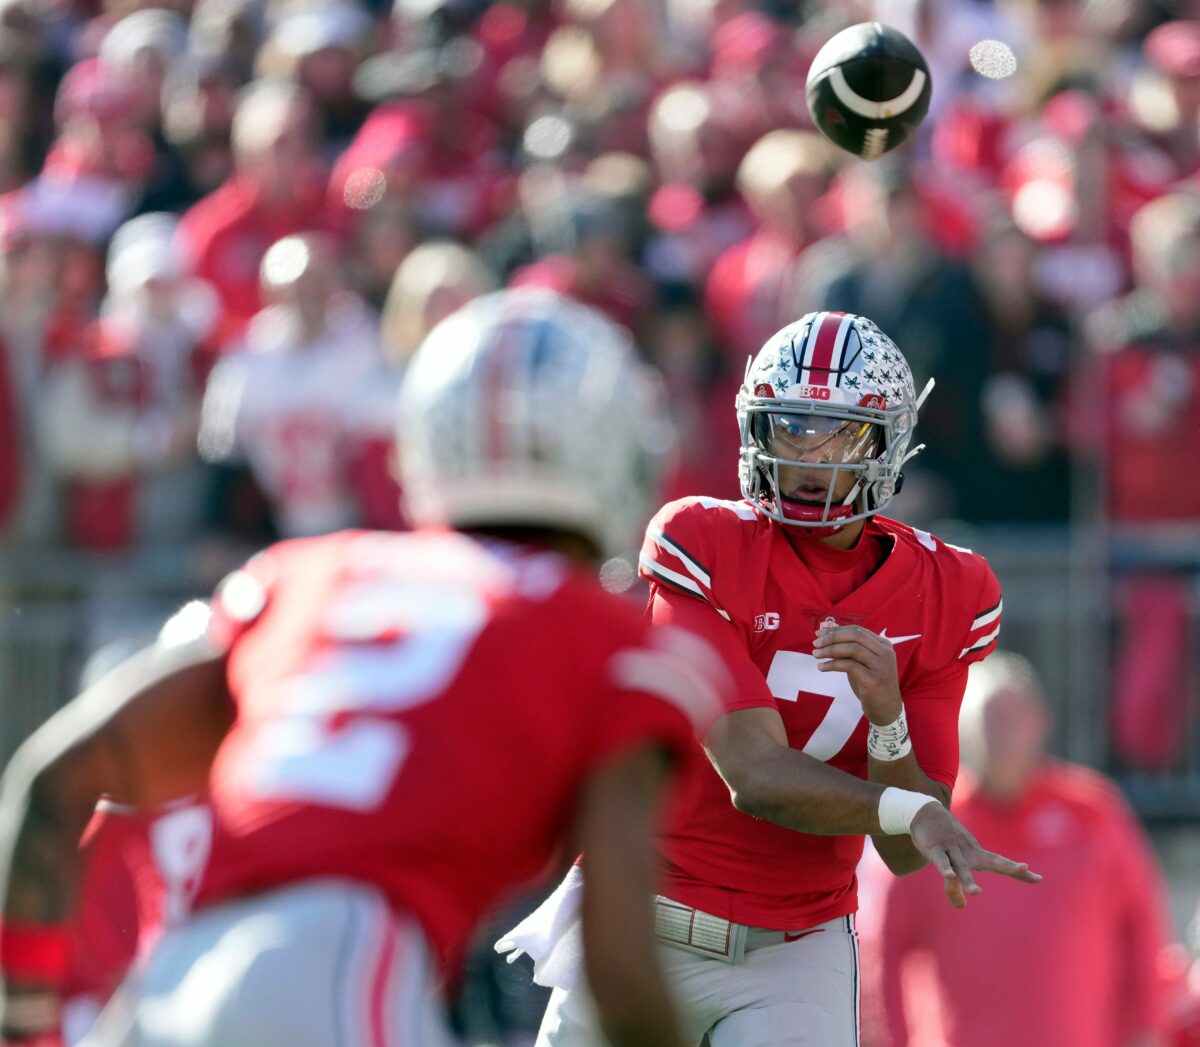 What does FiveThirtyEight say about Ohio State’s chances of making the College Football Playoff